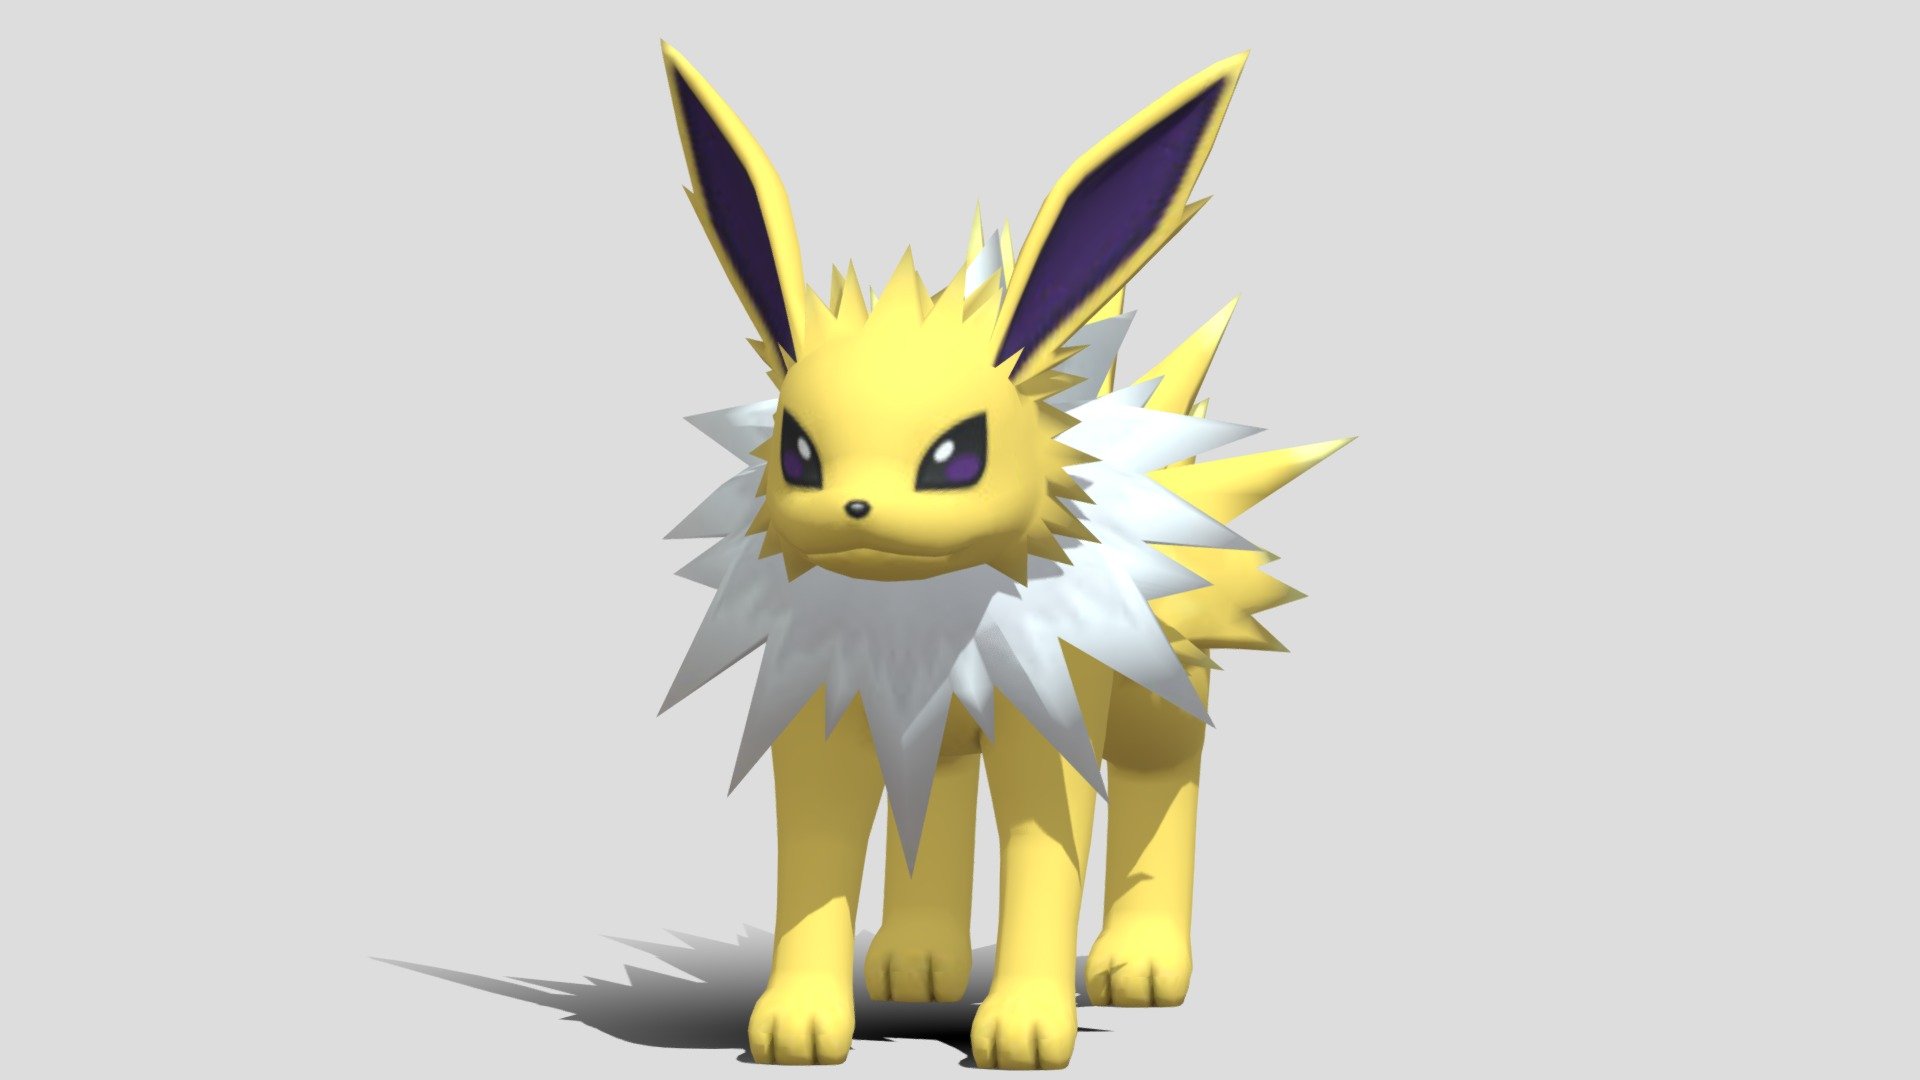 Jolteon is a quadrupedal, mammalian Pokémon. It is covered in yellow fur with a spiky fringe around its tail and a white ruff around its neck. Its ears are large and pointed with black interiors, and its eyes and small nose are black. It has slender legs and small paws, each with three toes and a pink paw-pad.

Jolteon creates electricity using an organ in its lungs, which causes crackling noises as it exhales. It can also generate low-level electricity in its cells, which is amplified by the negative ions it gathers and generates in its fur, allowing it to discharge 10,000-volt lightning bolts. Jolteon's prickly fur is made of electrically charged needles, which create a sparking noise as it moves. It is capable of launching its fur at enemies when agitated or startled; the charge is so powerful that it can remain on the shed fur for a long time. This Pokémon is most often found in cities and towns under the ownership of Trainers 3d model